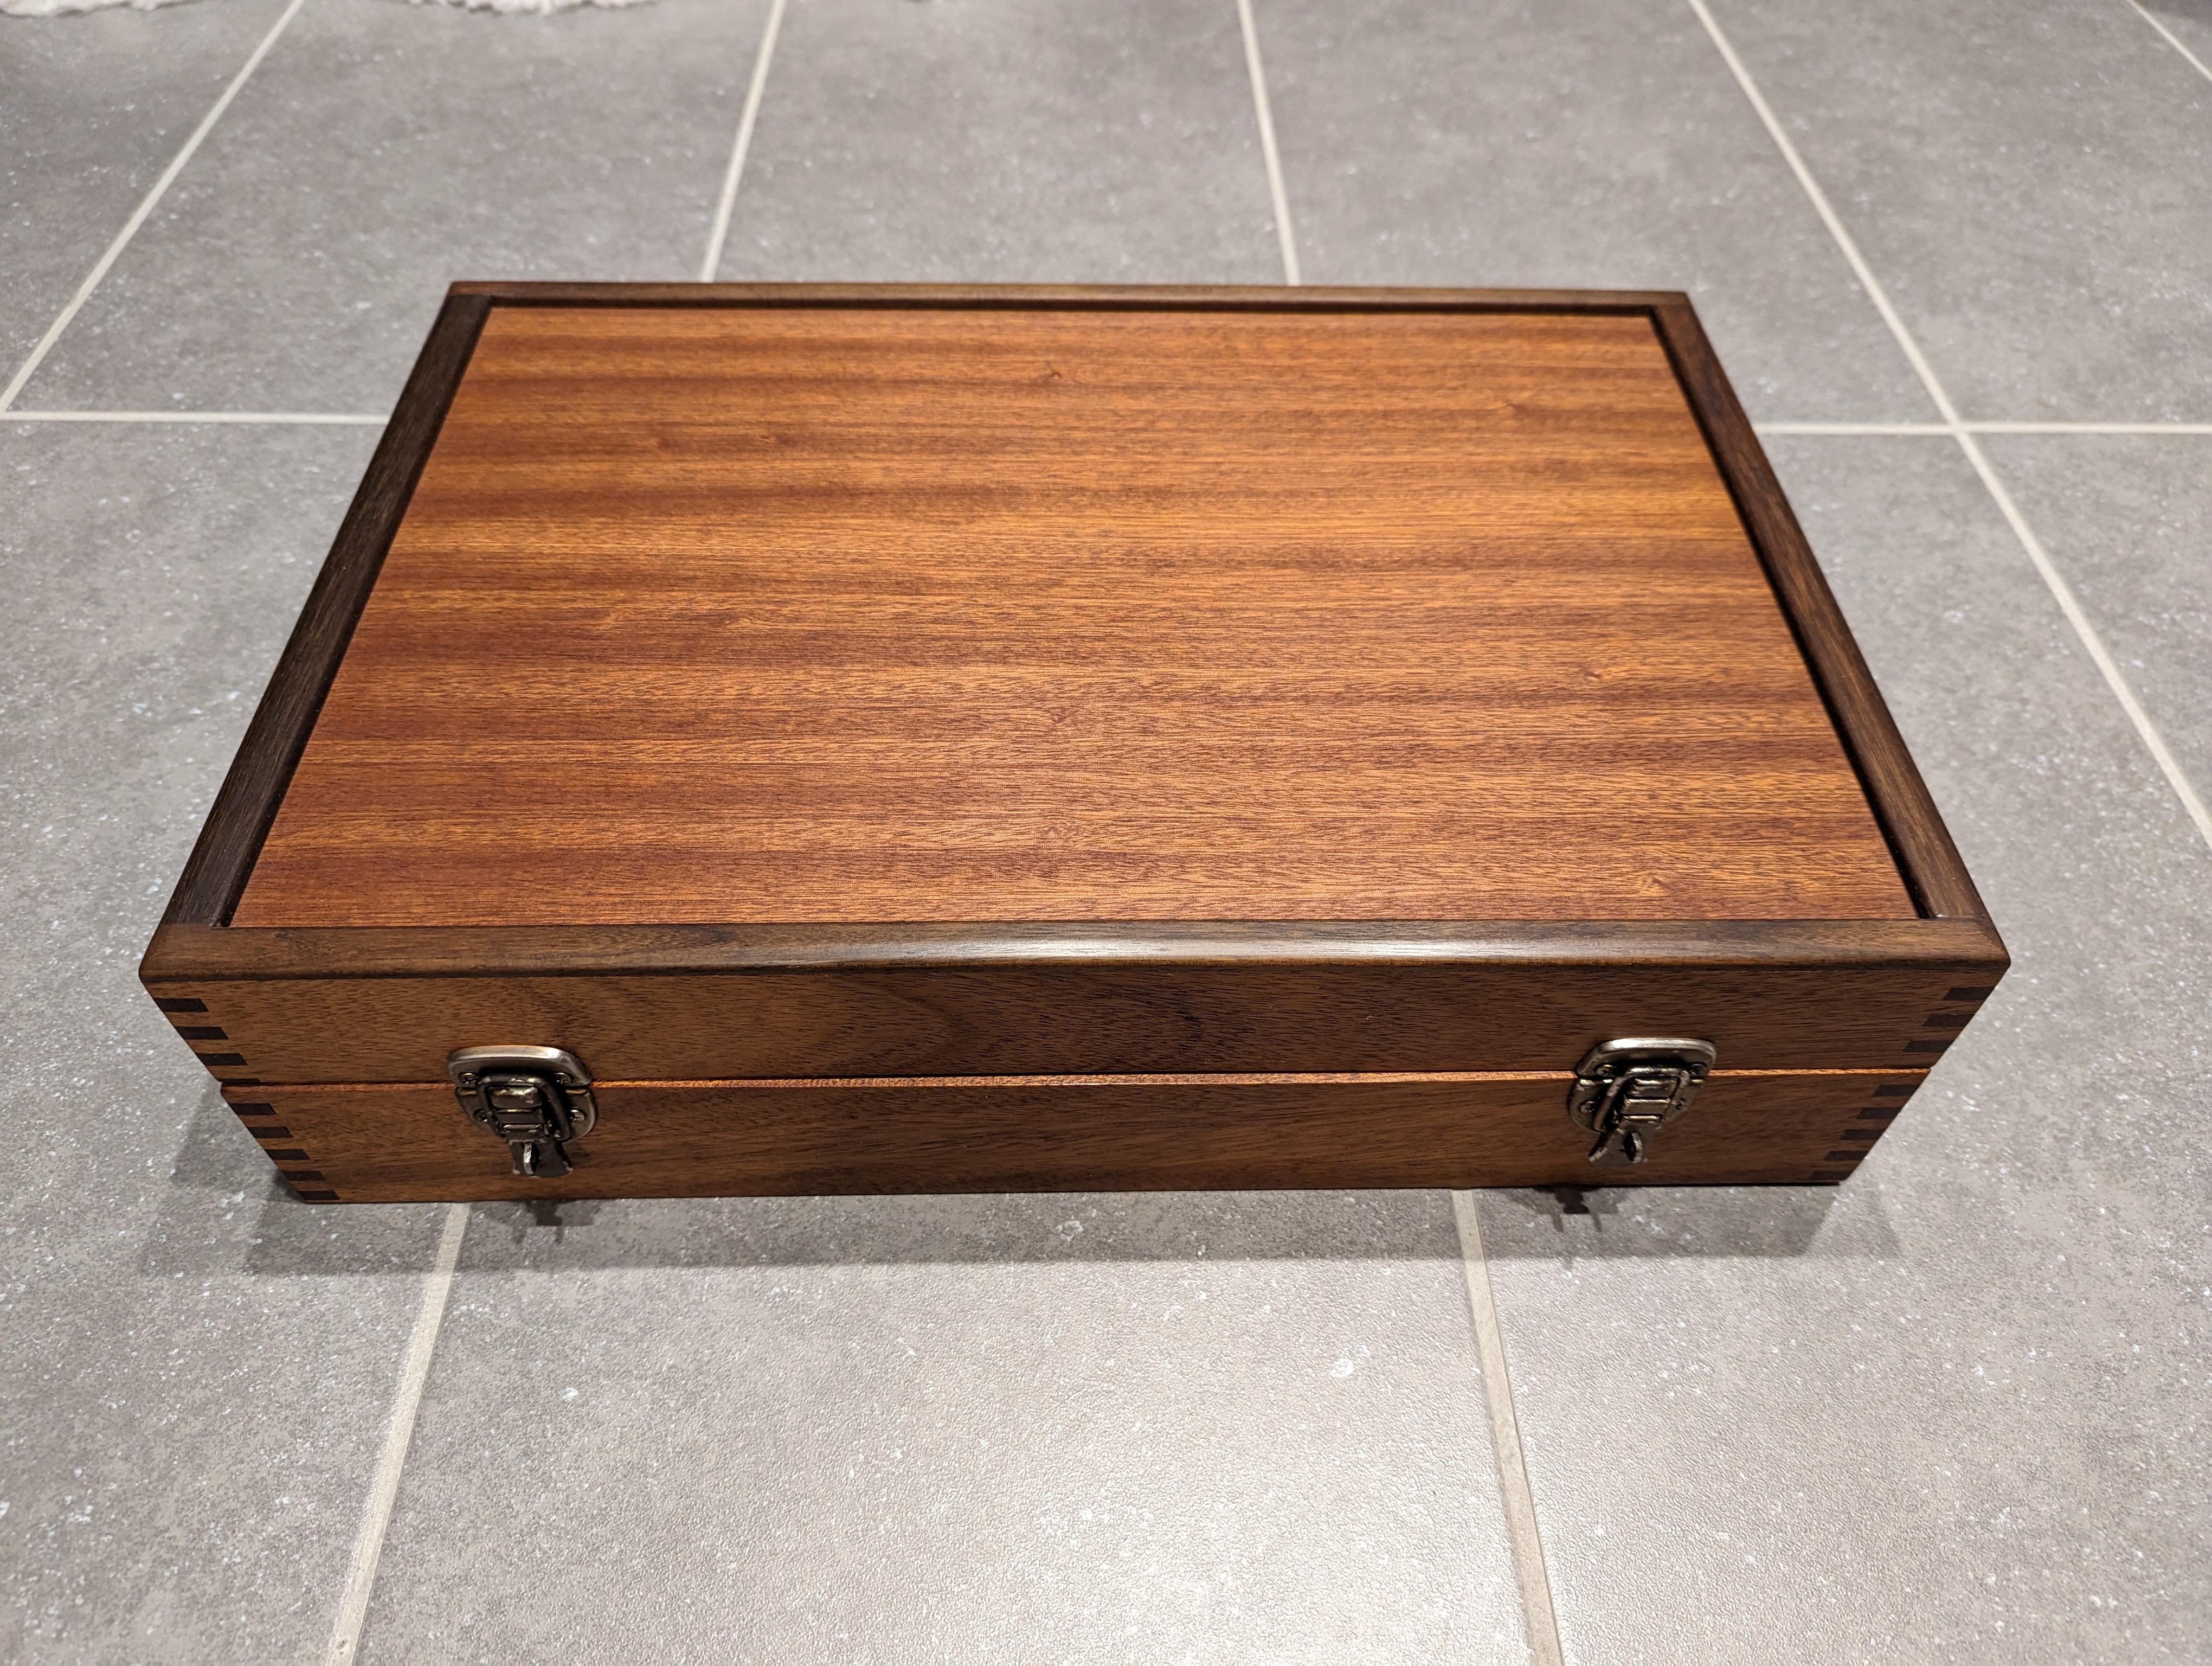 Mahogany box with nice finger joinery.

Restored condition. Previously used to store machinists tools.

